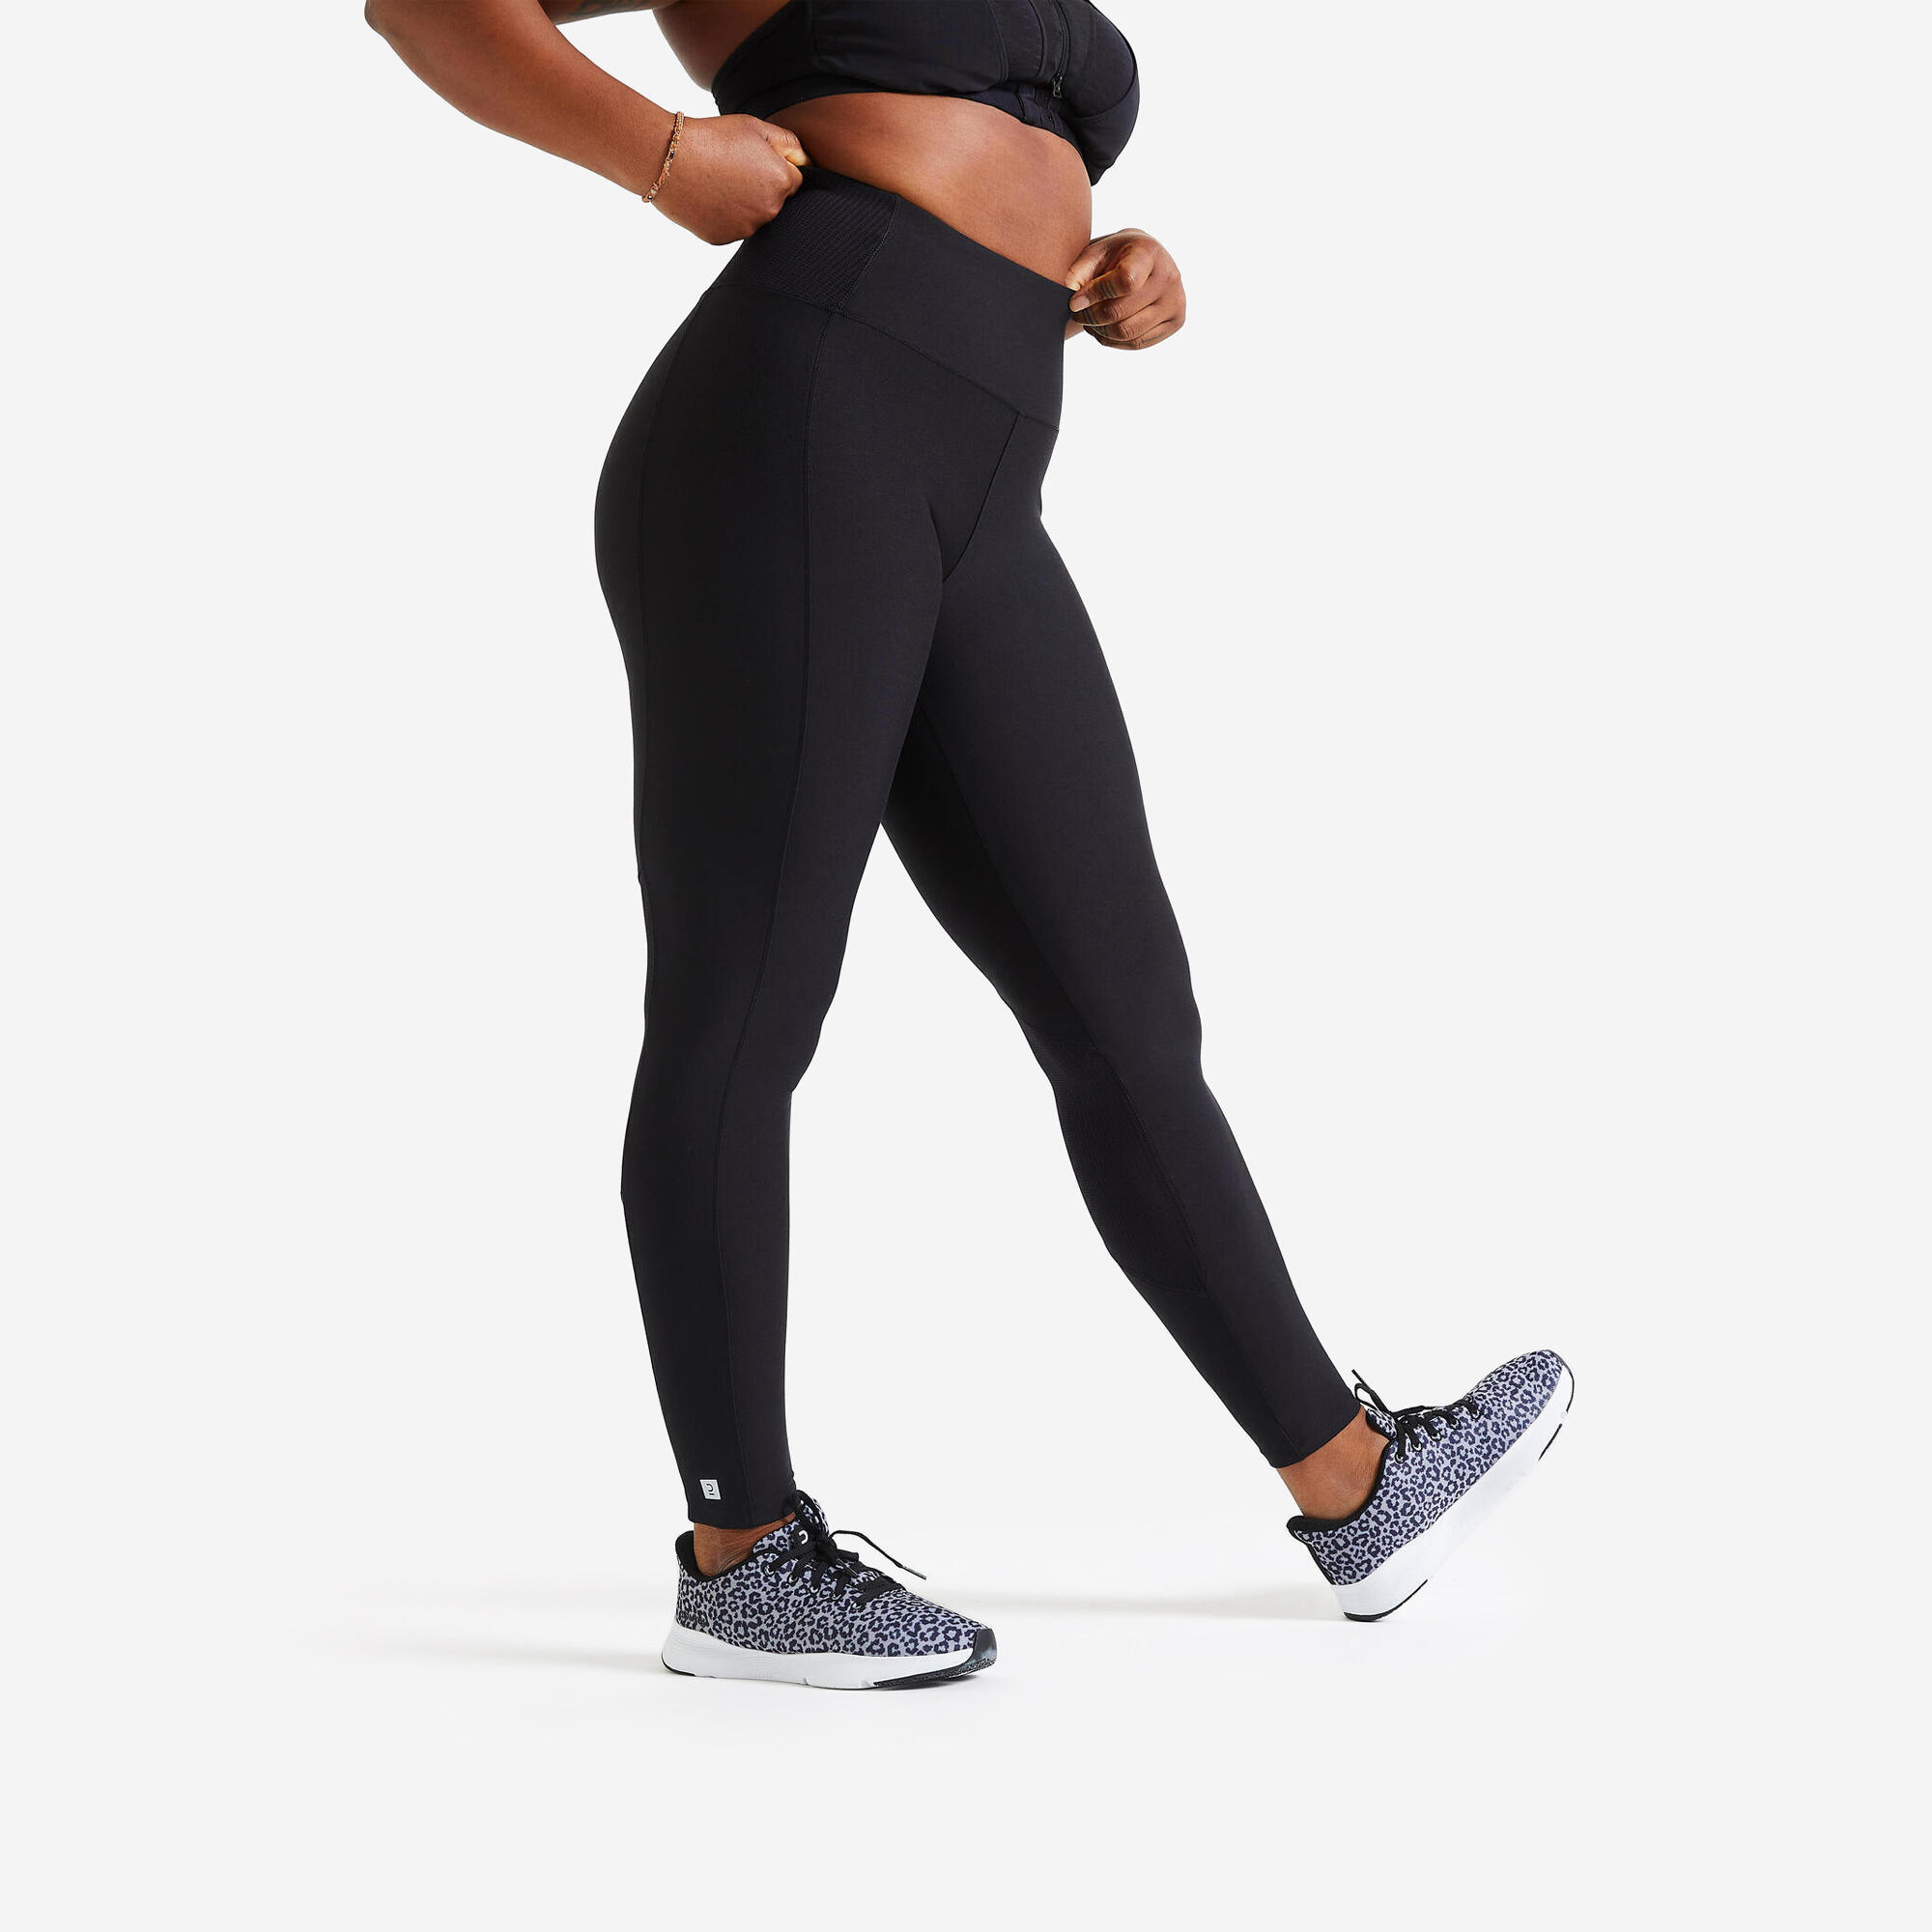 Flounce London gym running leggings with drawstring waist and bum sculpt in  black